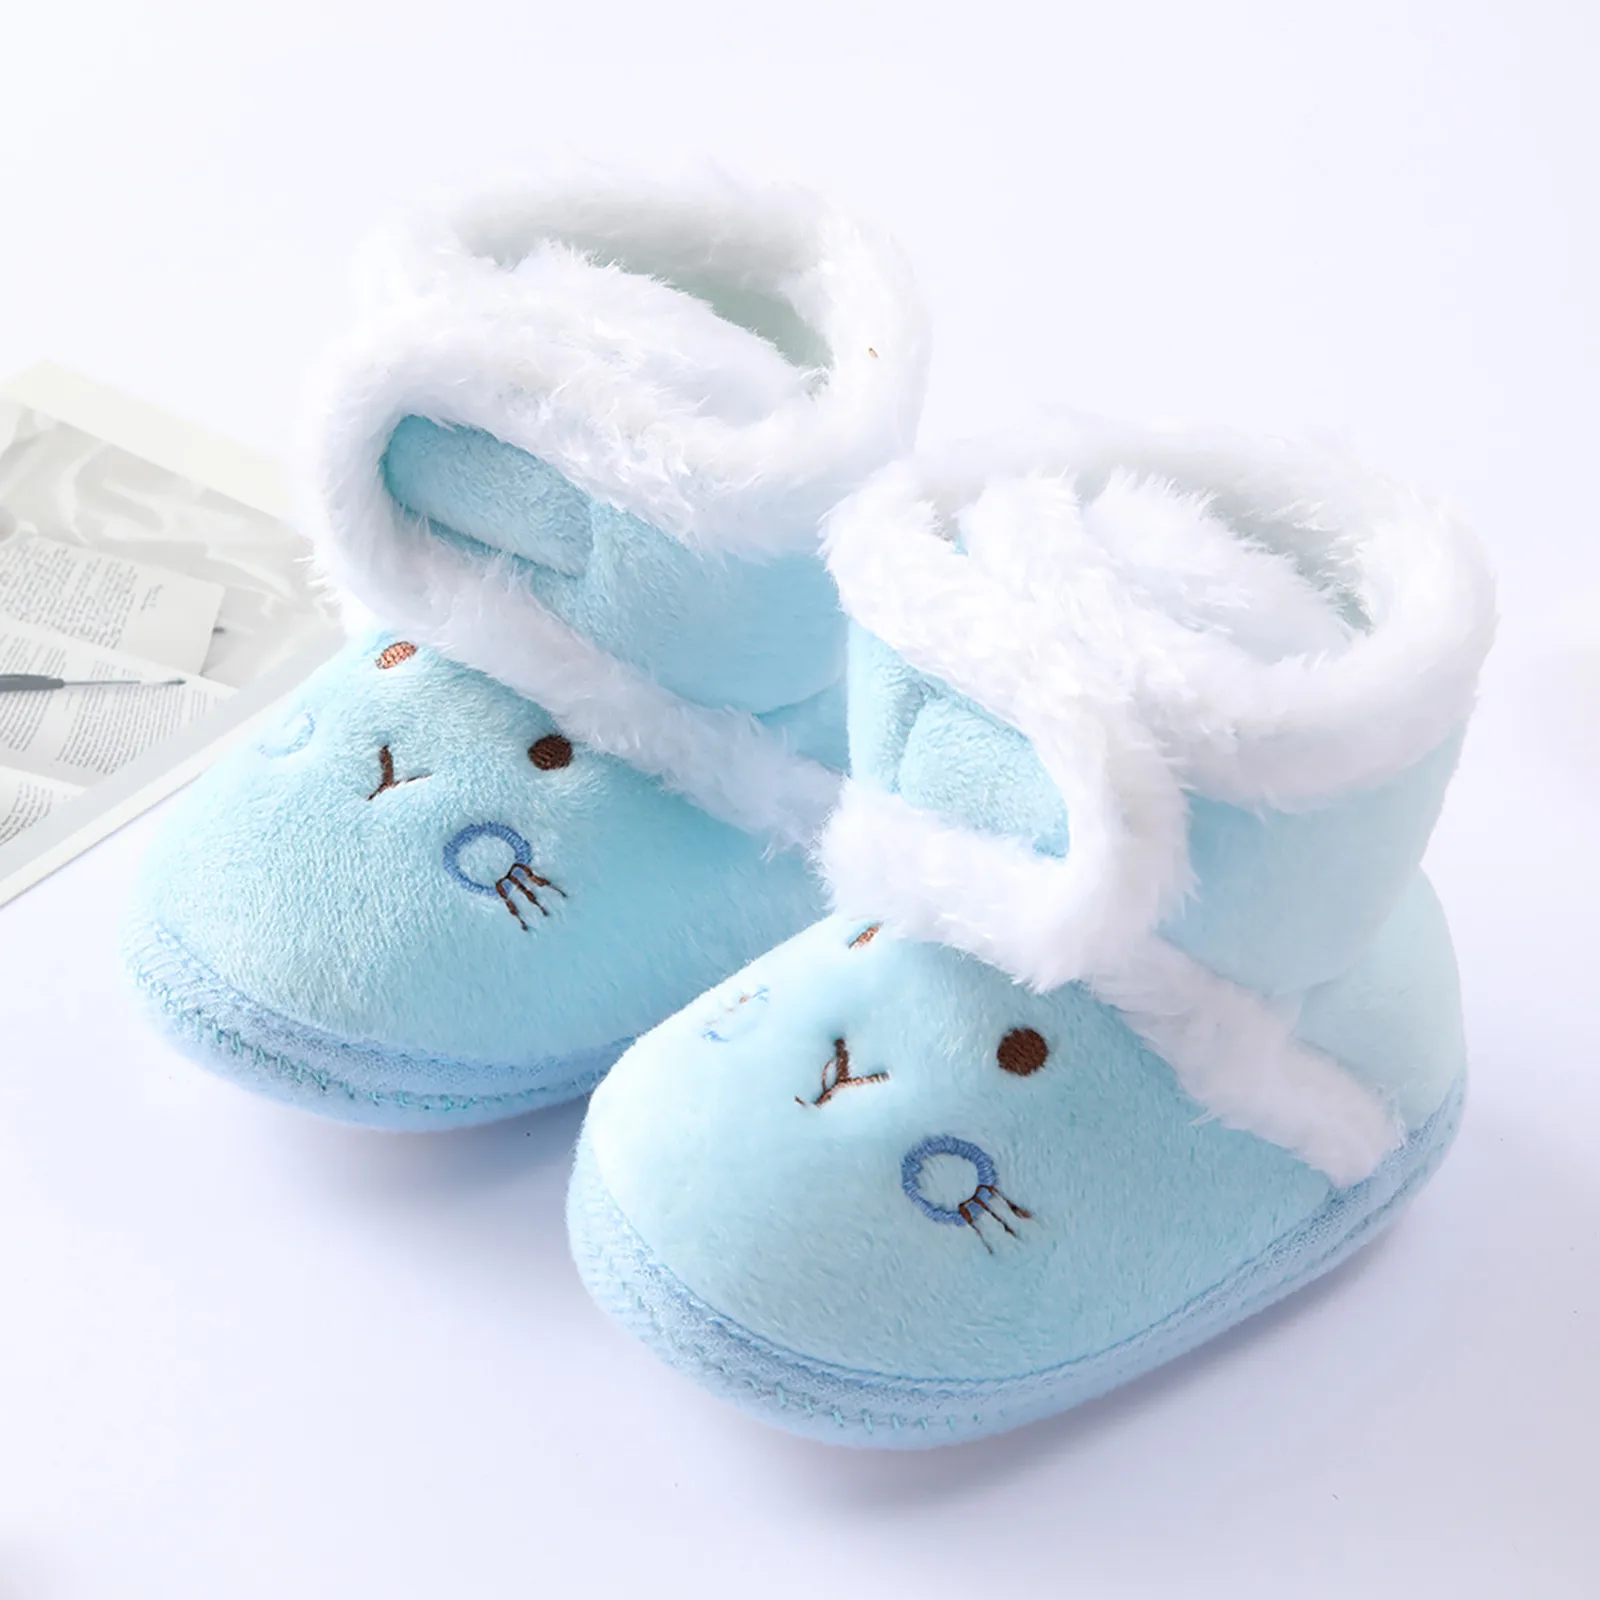 CENCIRILY Newborn Baby Boys Girls Cozy Fleece Booties Soft Non Slip Grips Sole Winter Socks Crib Shoes for Infant Toddler First Walkers 